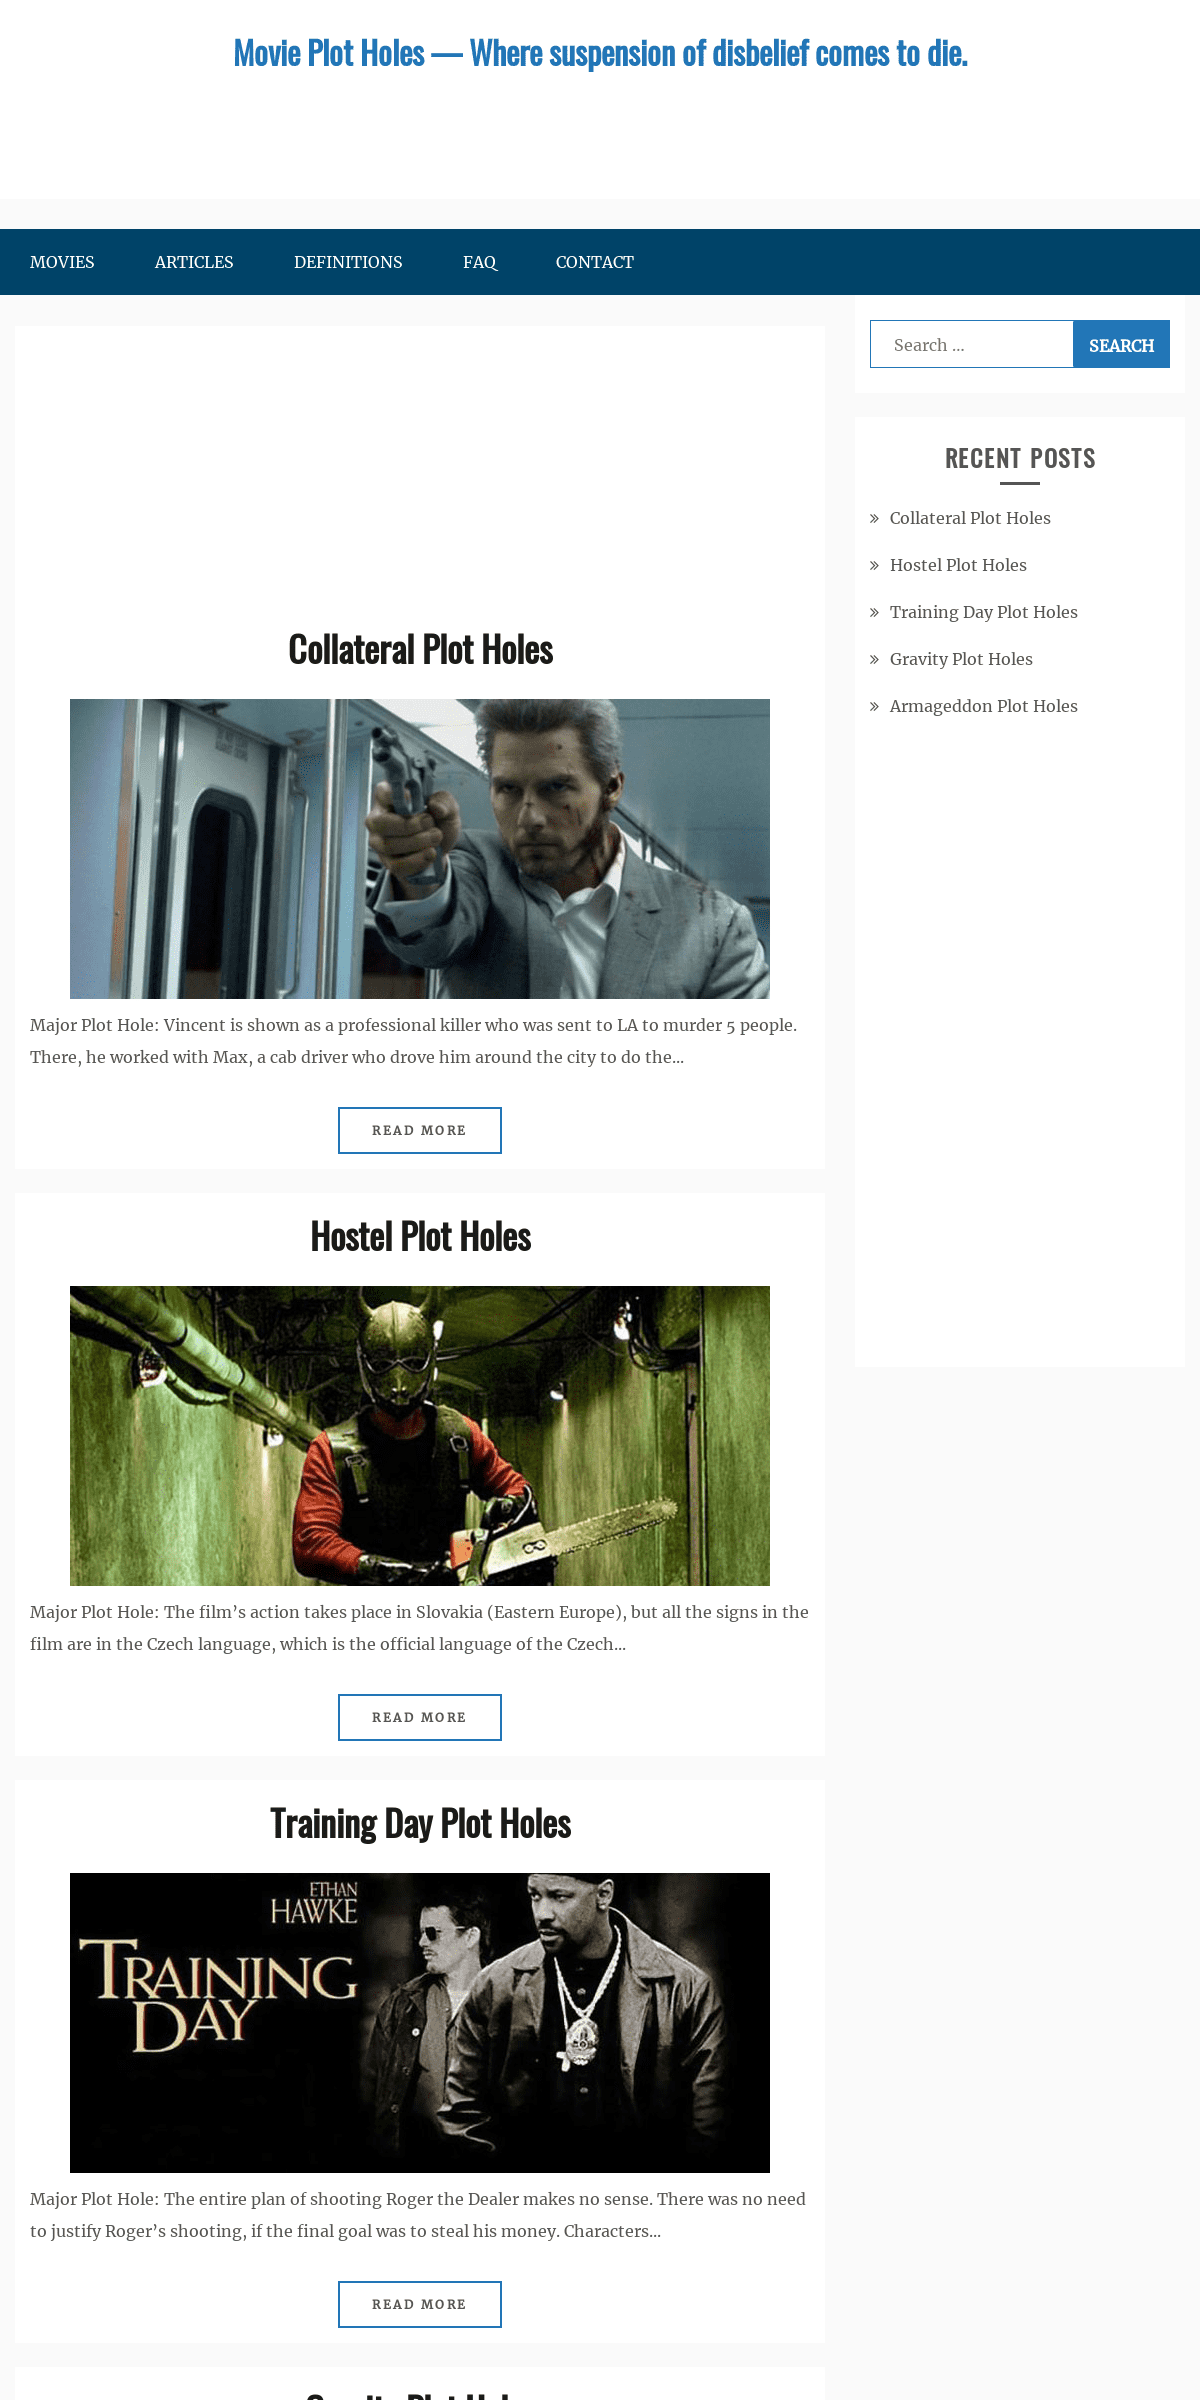 A complete backup of movieplotholes.com